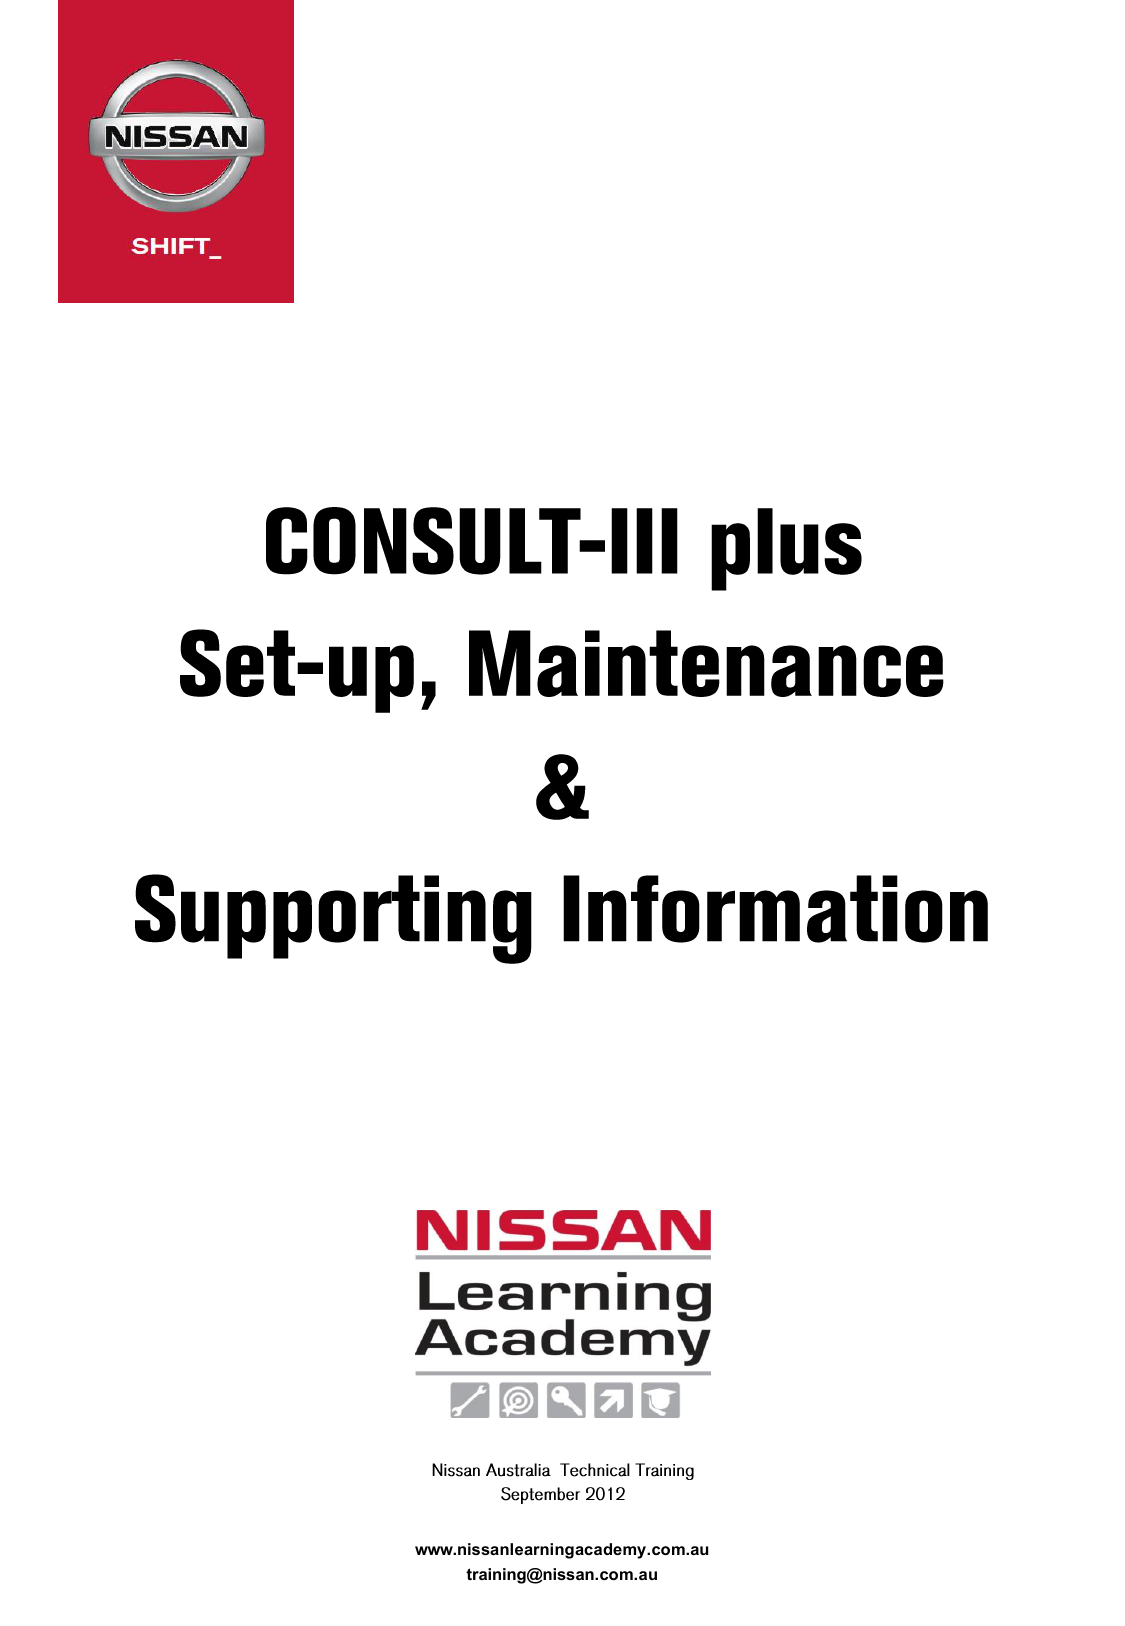 nissan consult 3 plus install not on toughbook